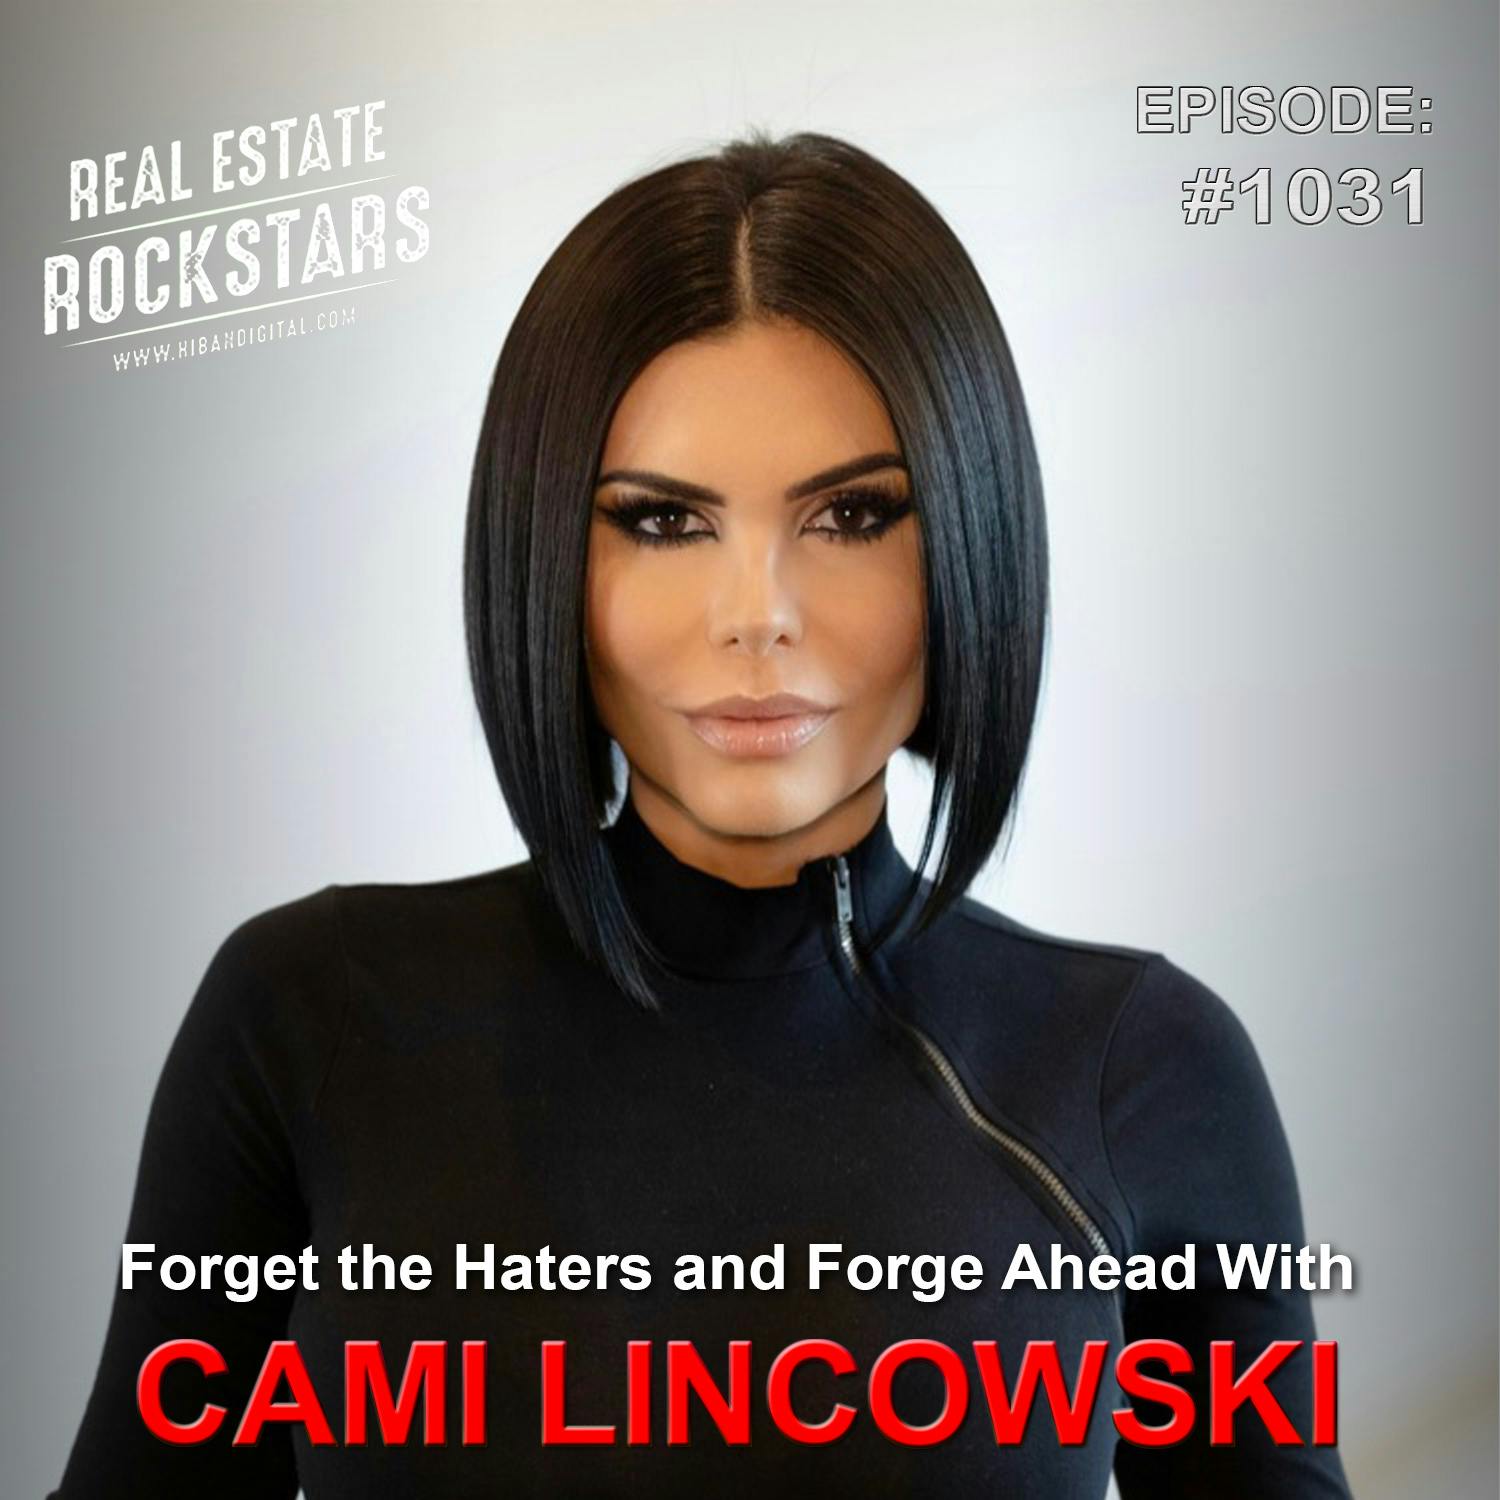 1031: Forget the Haters and Forge Ahead With Cami Lincowski